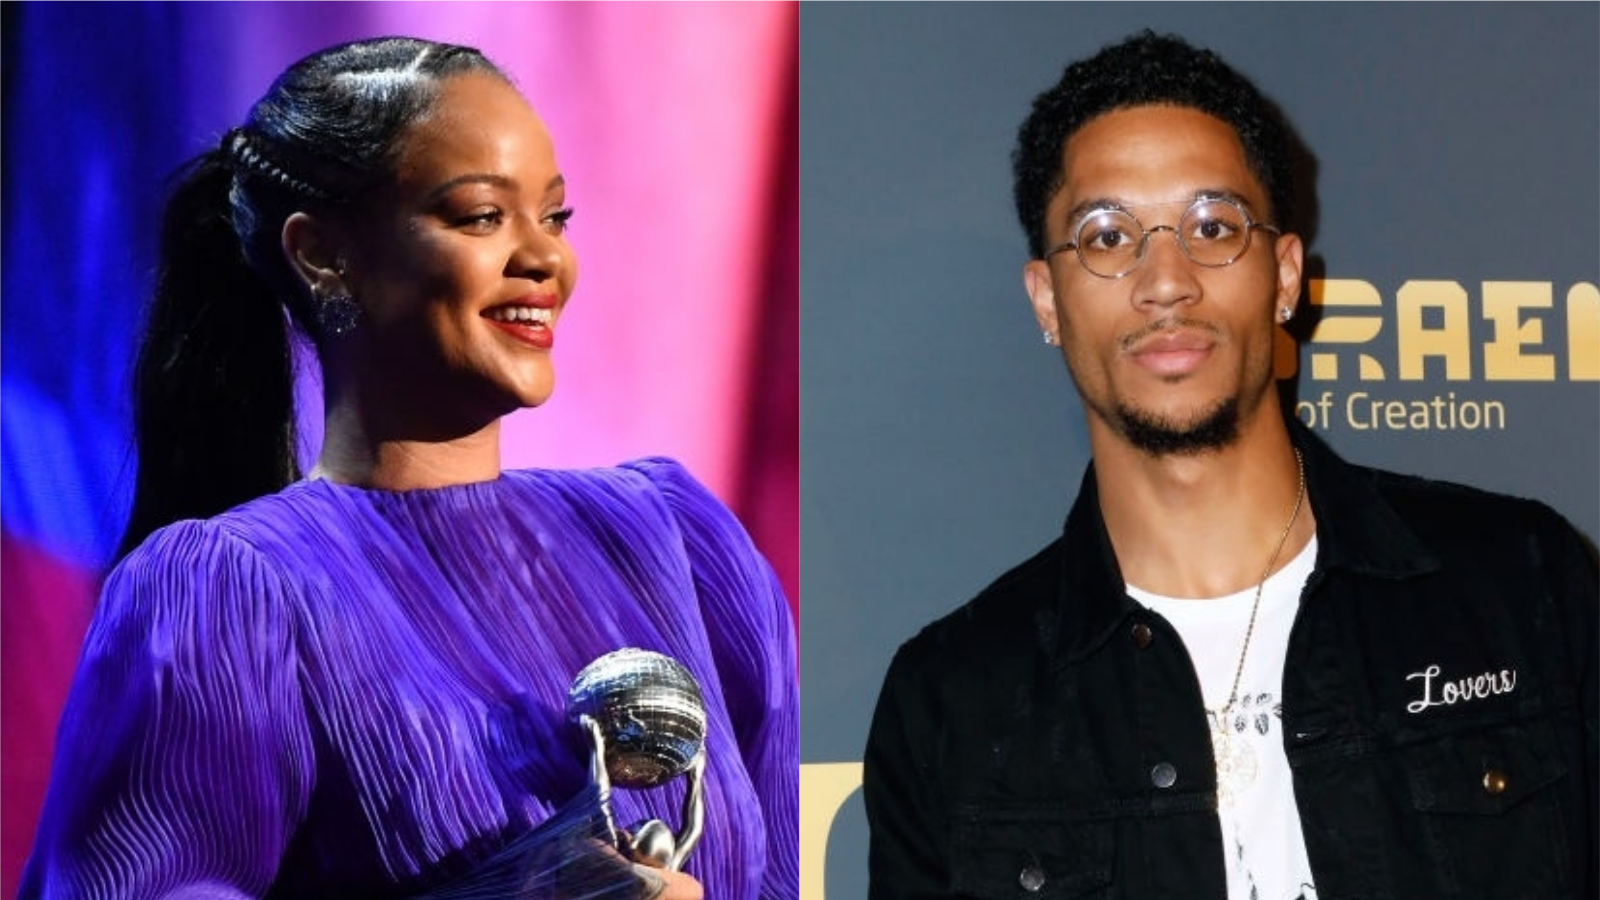 Rihanna Trolls NBA Player Josh Hart After His Hilariously Awkward Encounter With LeBron James On The Court